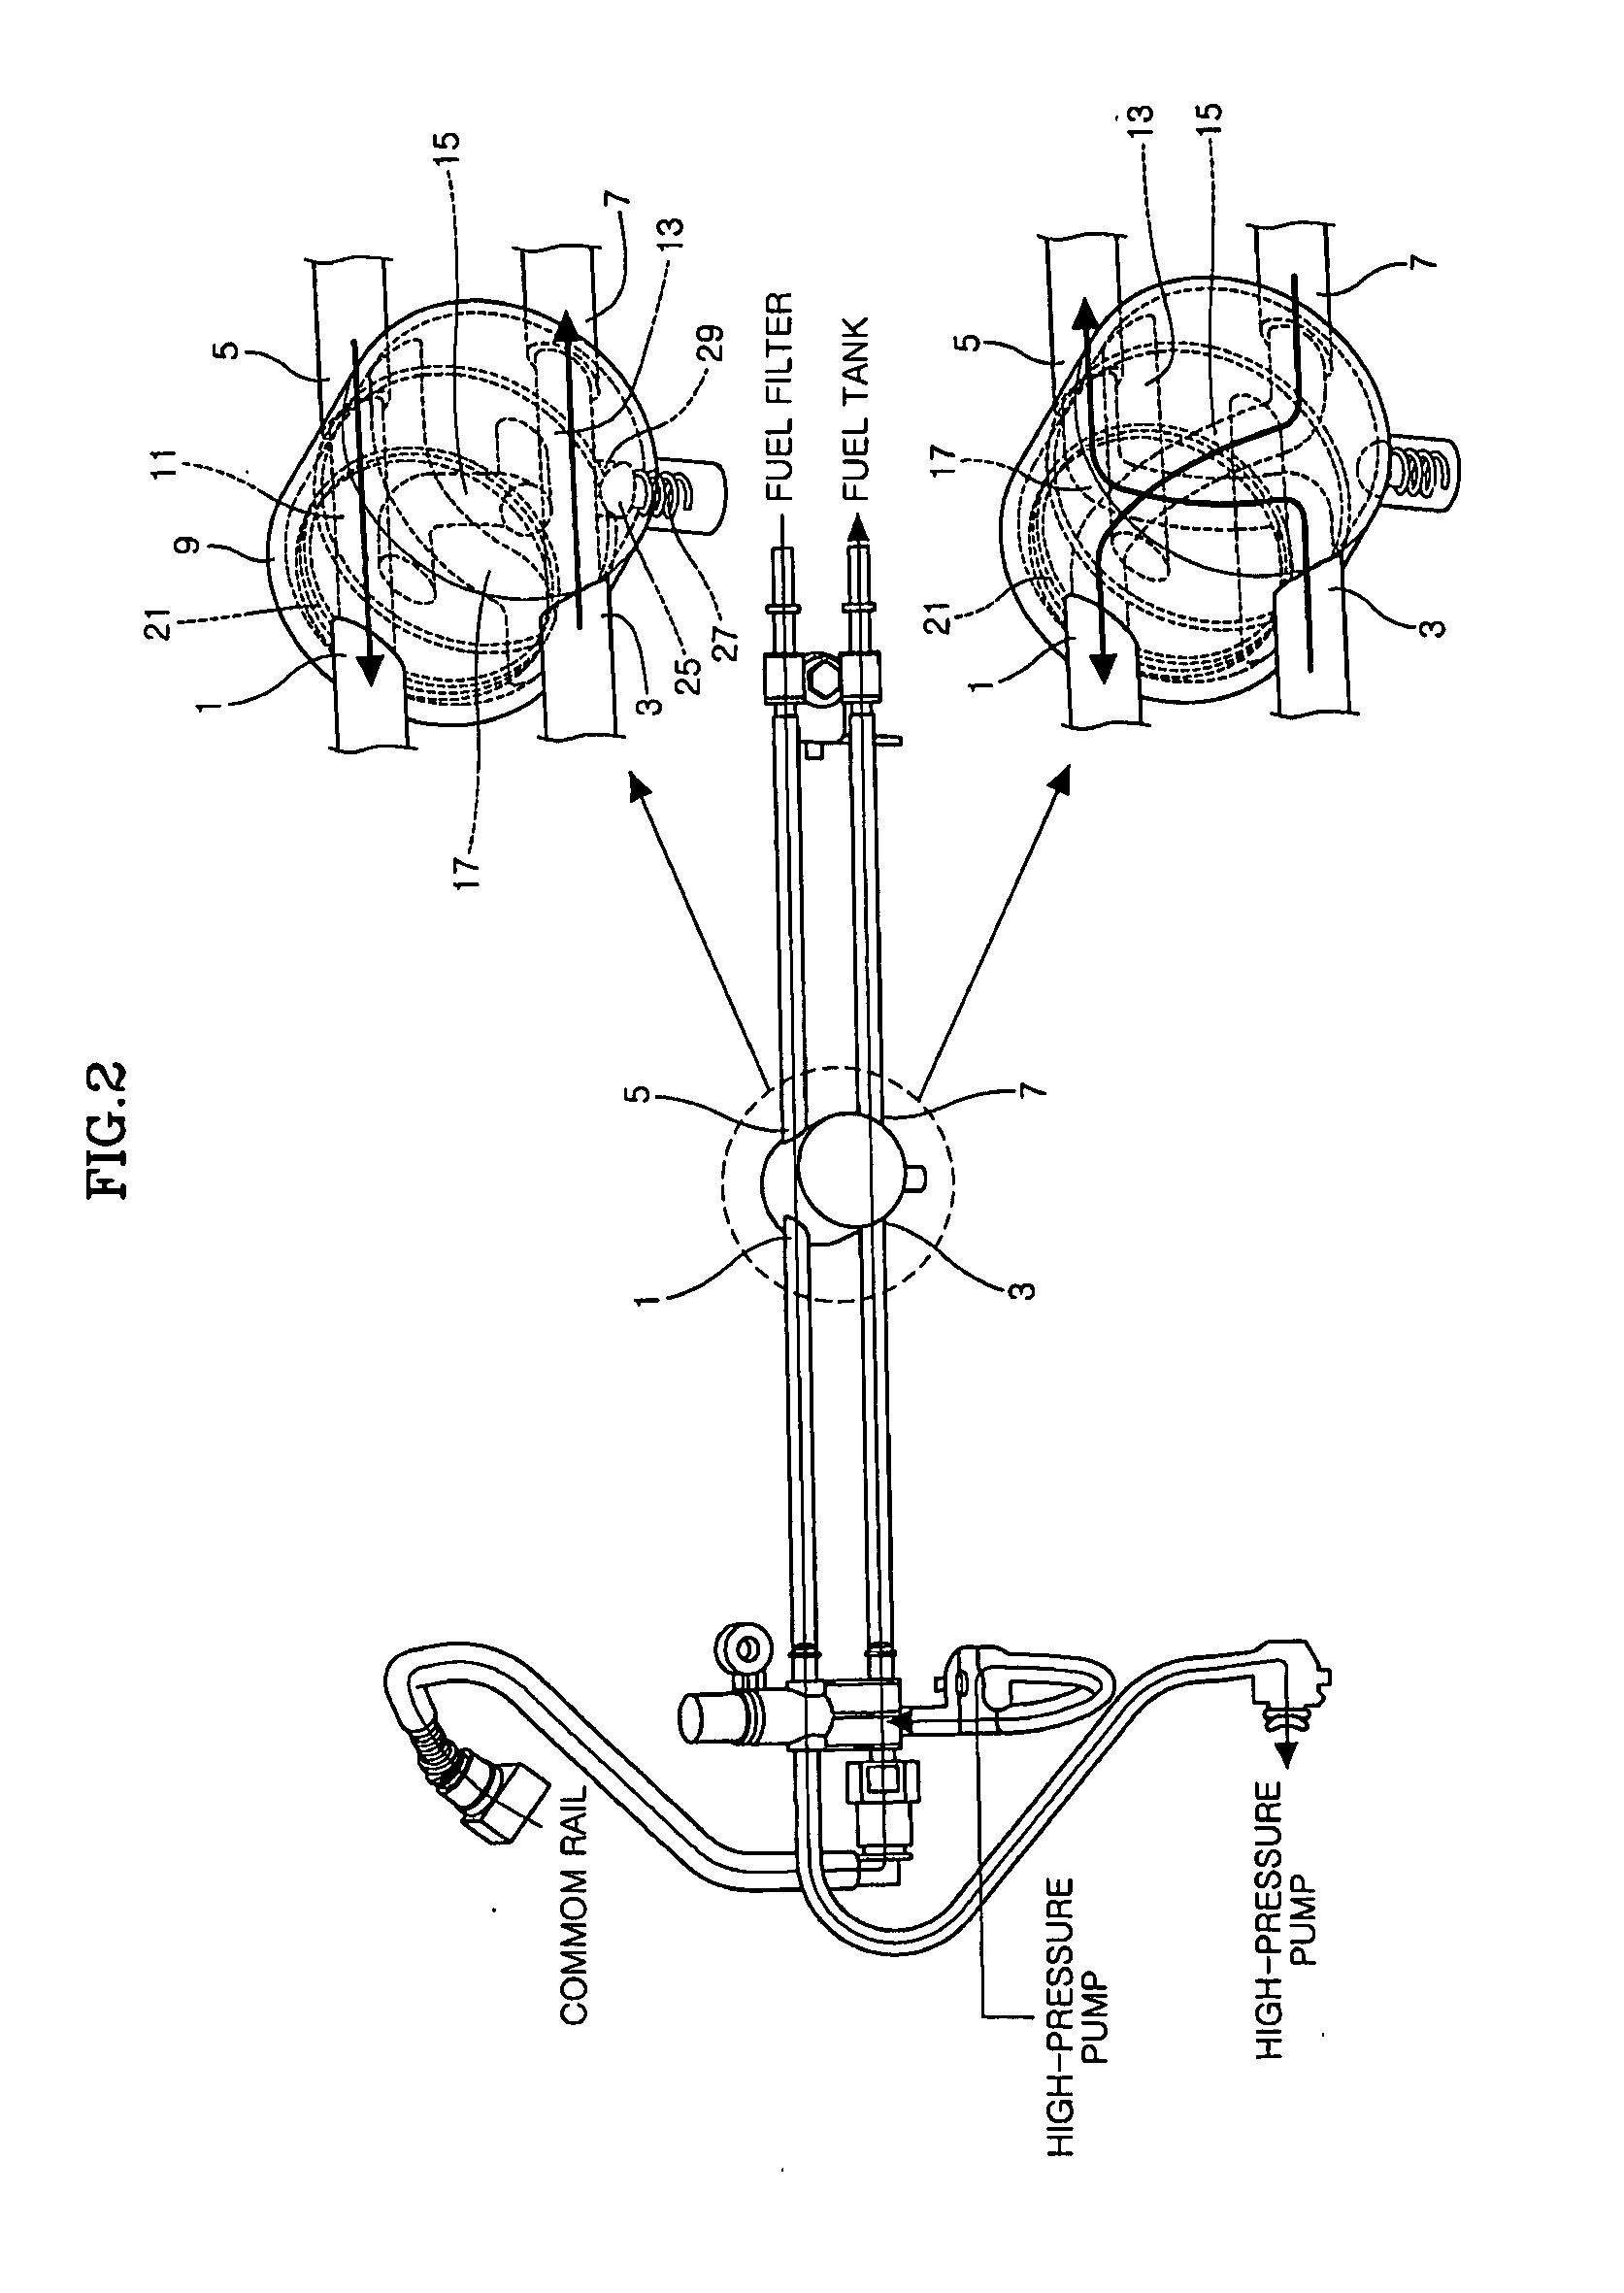 System for automatically changing fuel passages